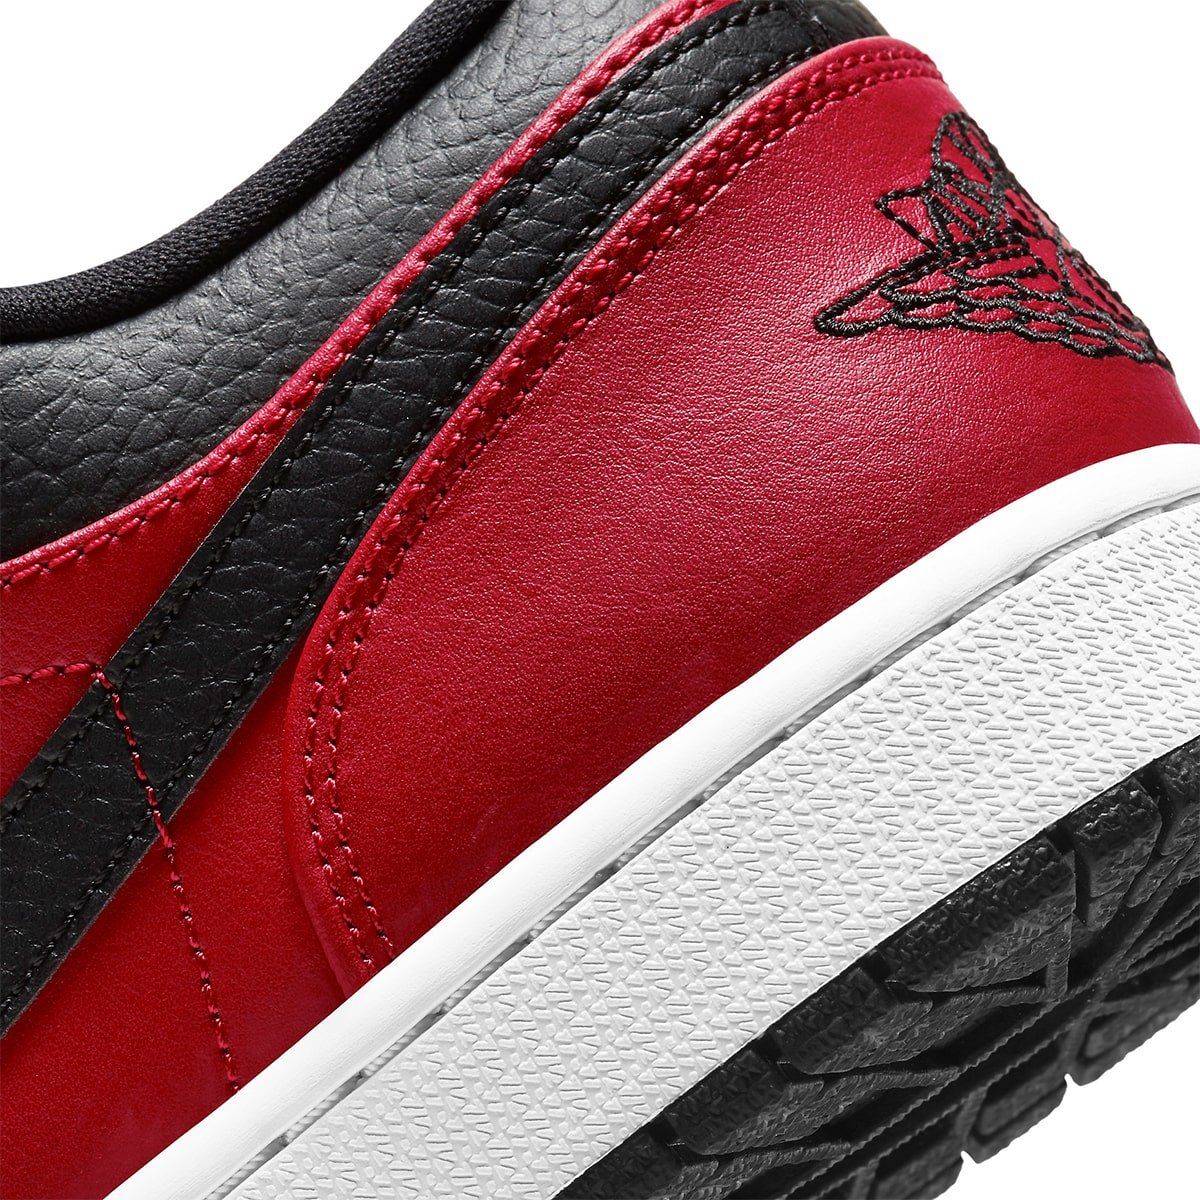 Air Jordan 1 Low Gym Red Black Releases Again This Month House Of Heat